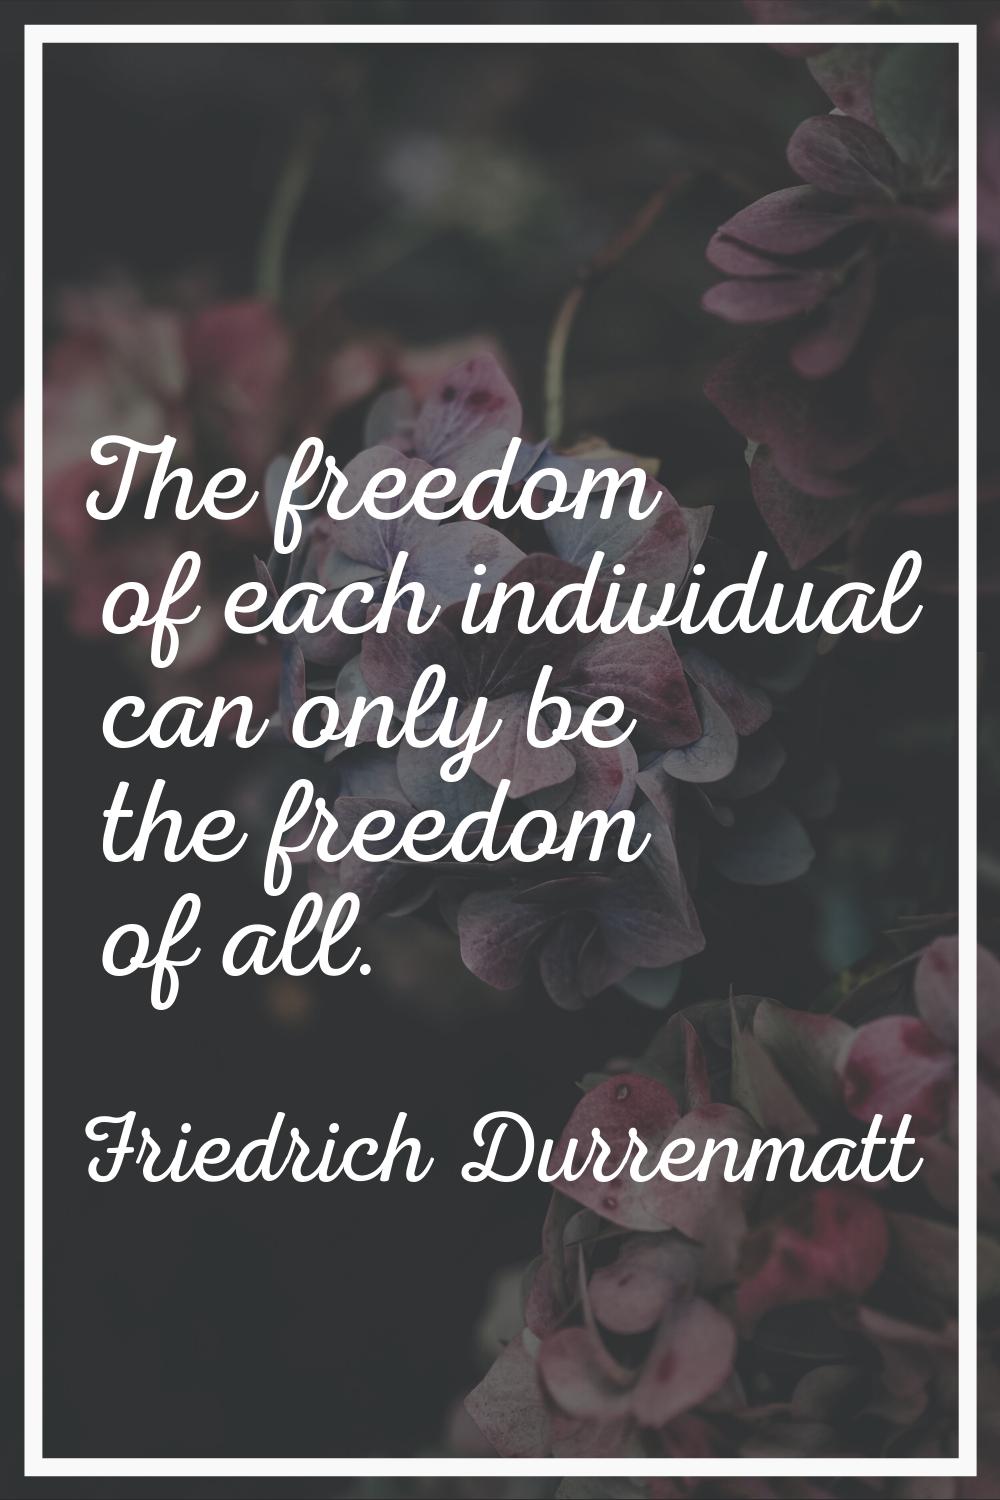 The freedom of each individual can only be the freedom of all.